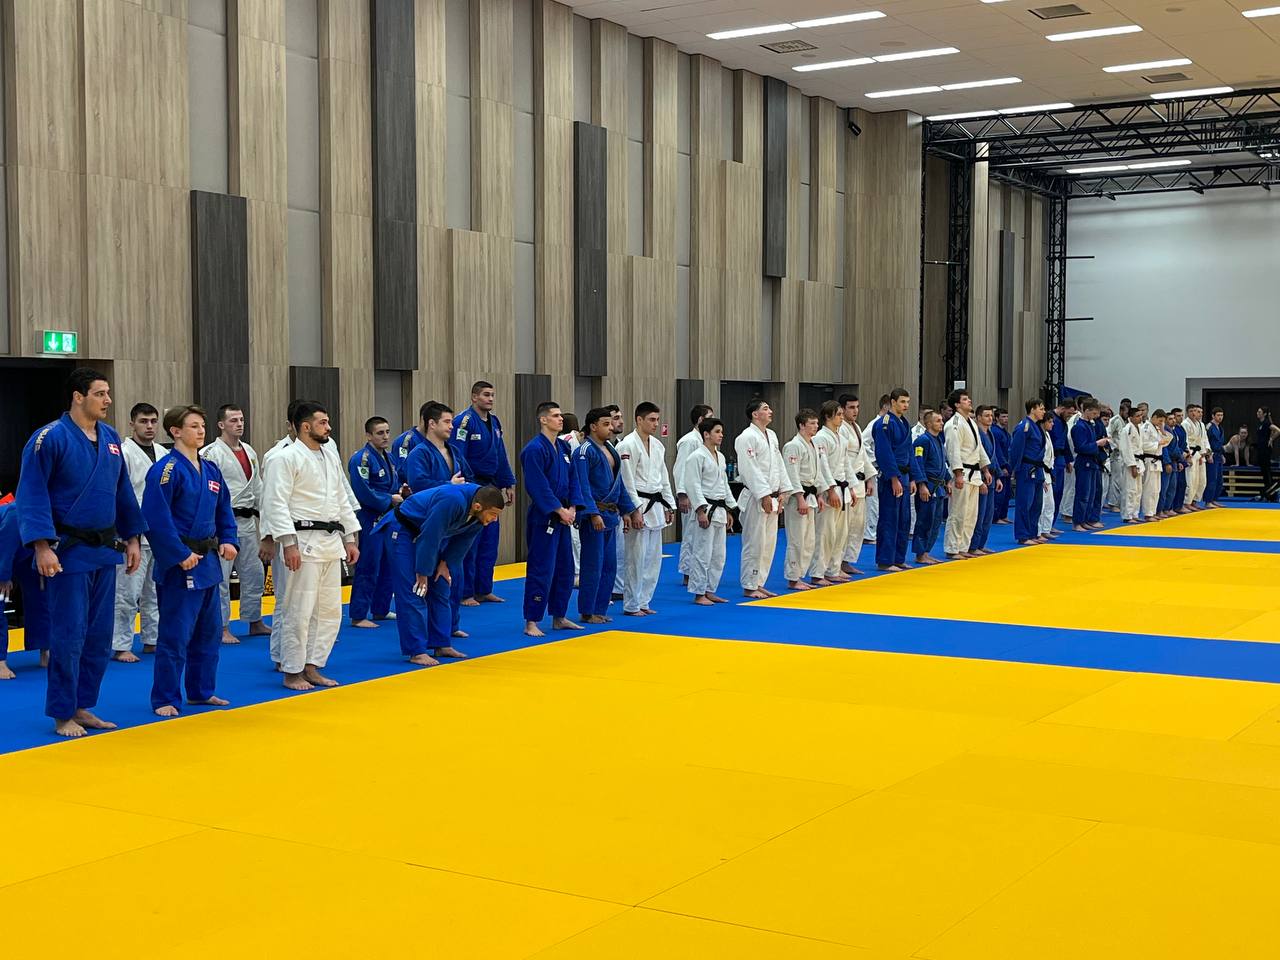 EJU CONTINUE TO HOST ATHLETES FOR MAJOR PREPARATION IN OTC